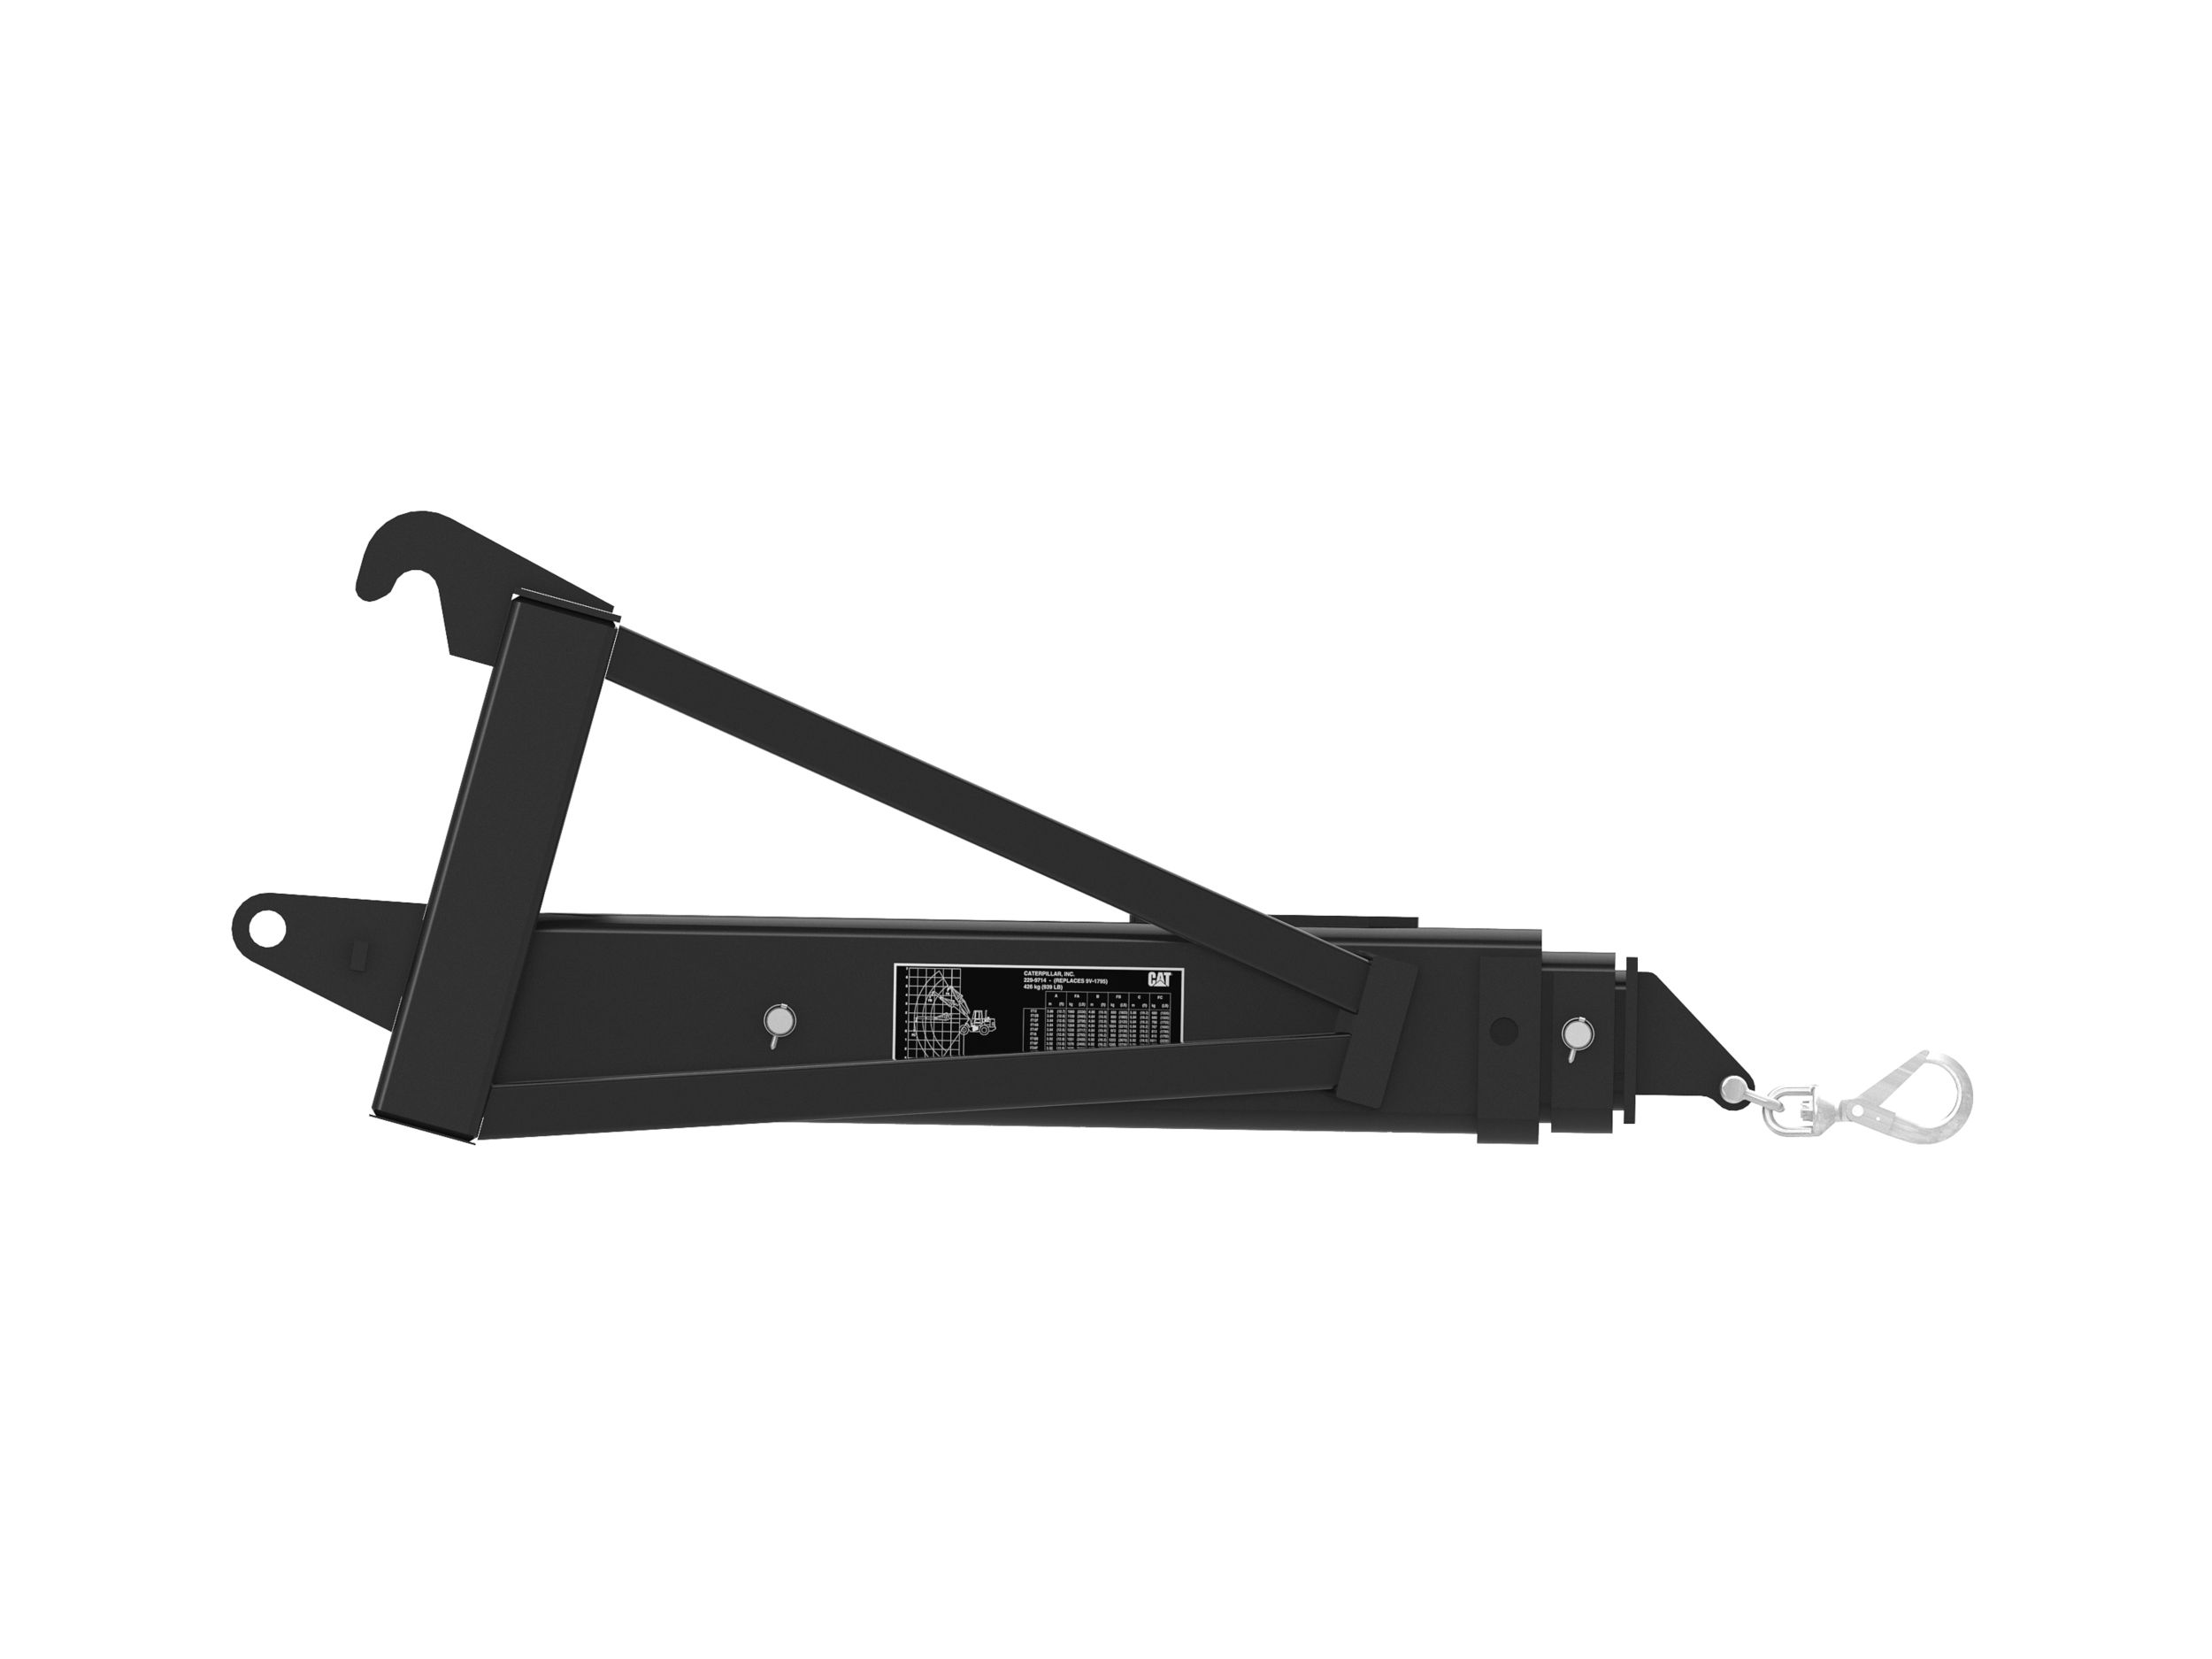 Material Handling Arms 3941 mm (155 in)